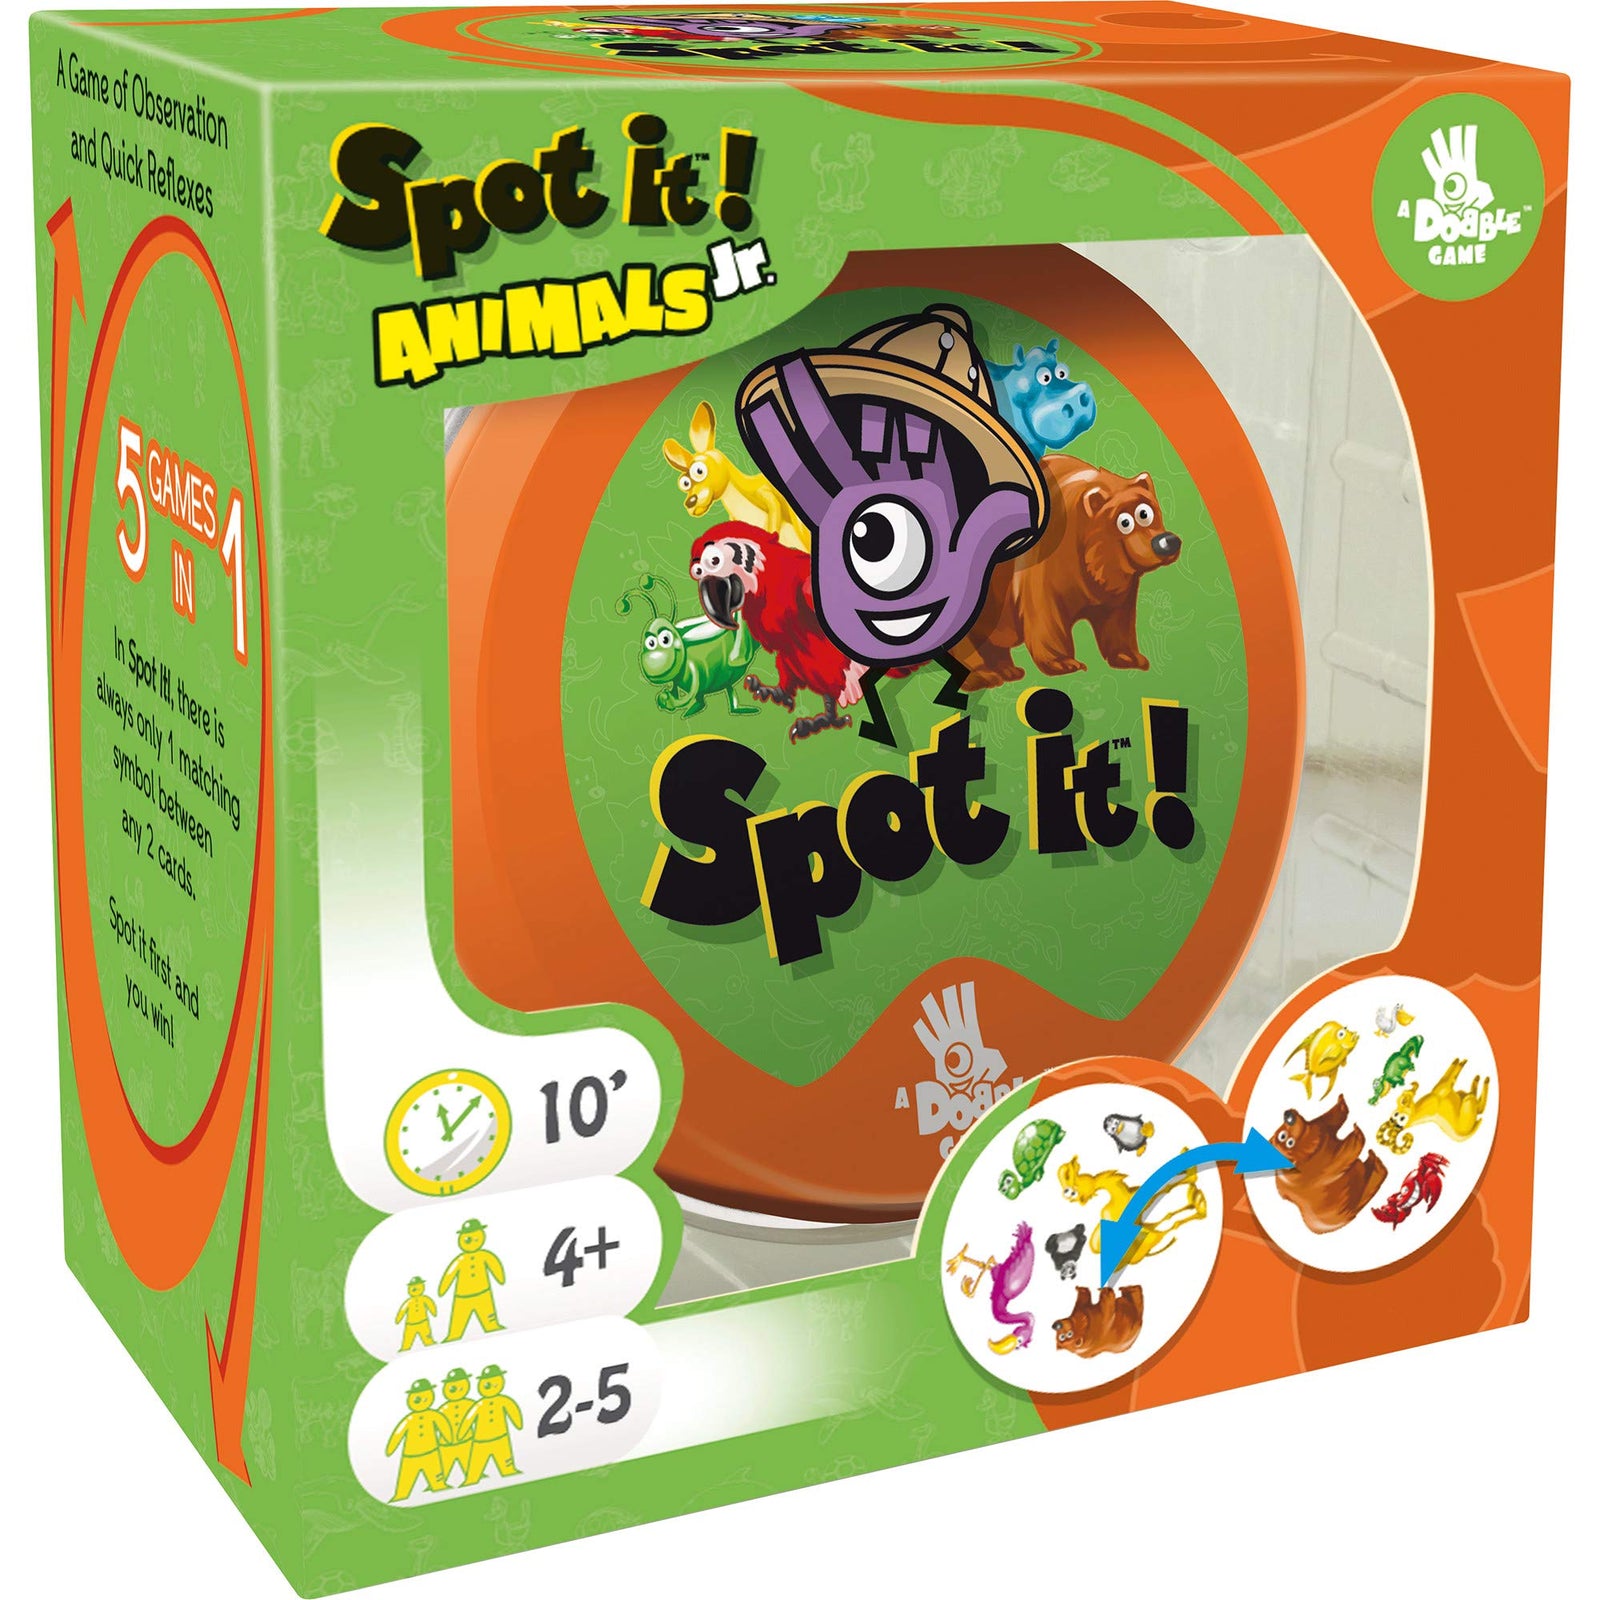 Spot It! Junior Animals Card Game | Game For Kids | Preschool Age 4+ | 2 to 5 Players | Average Playtime 10 minutes | Made by Zygomatic